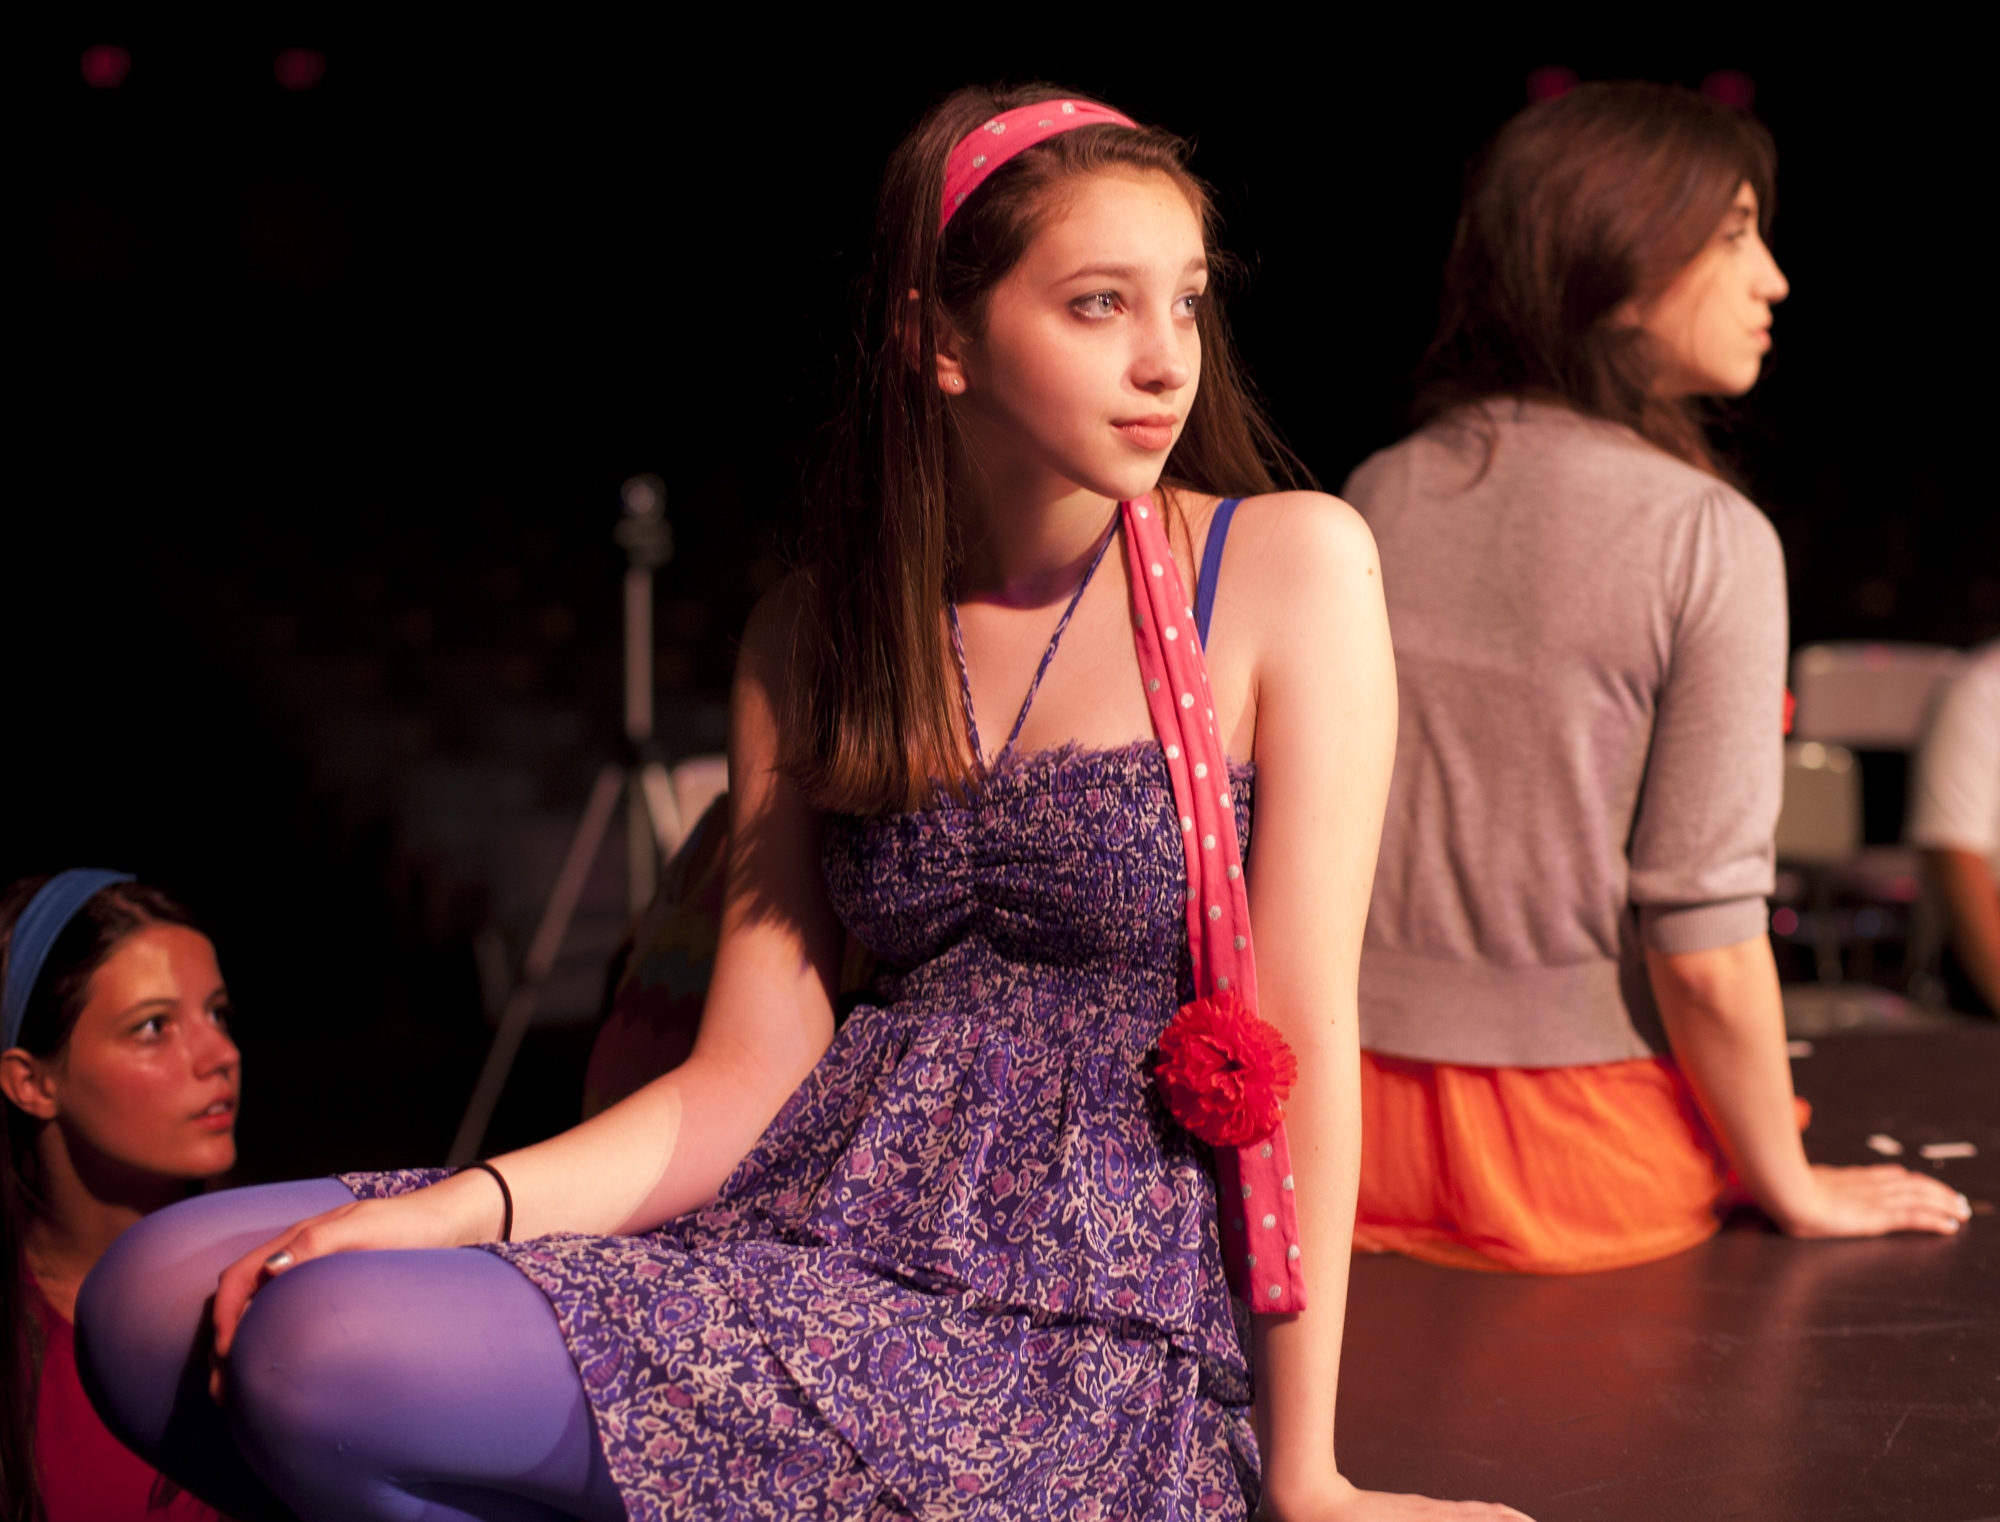 Brianna Ward... performing in the LSA Repertory Theatre Company stage production of 